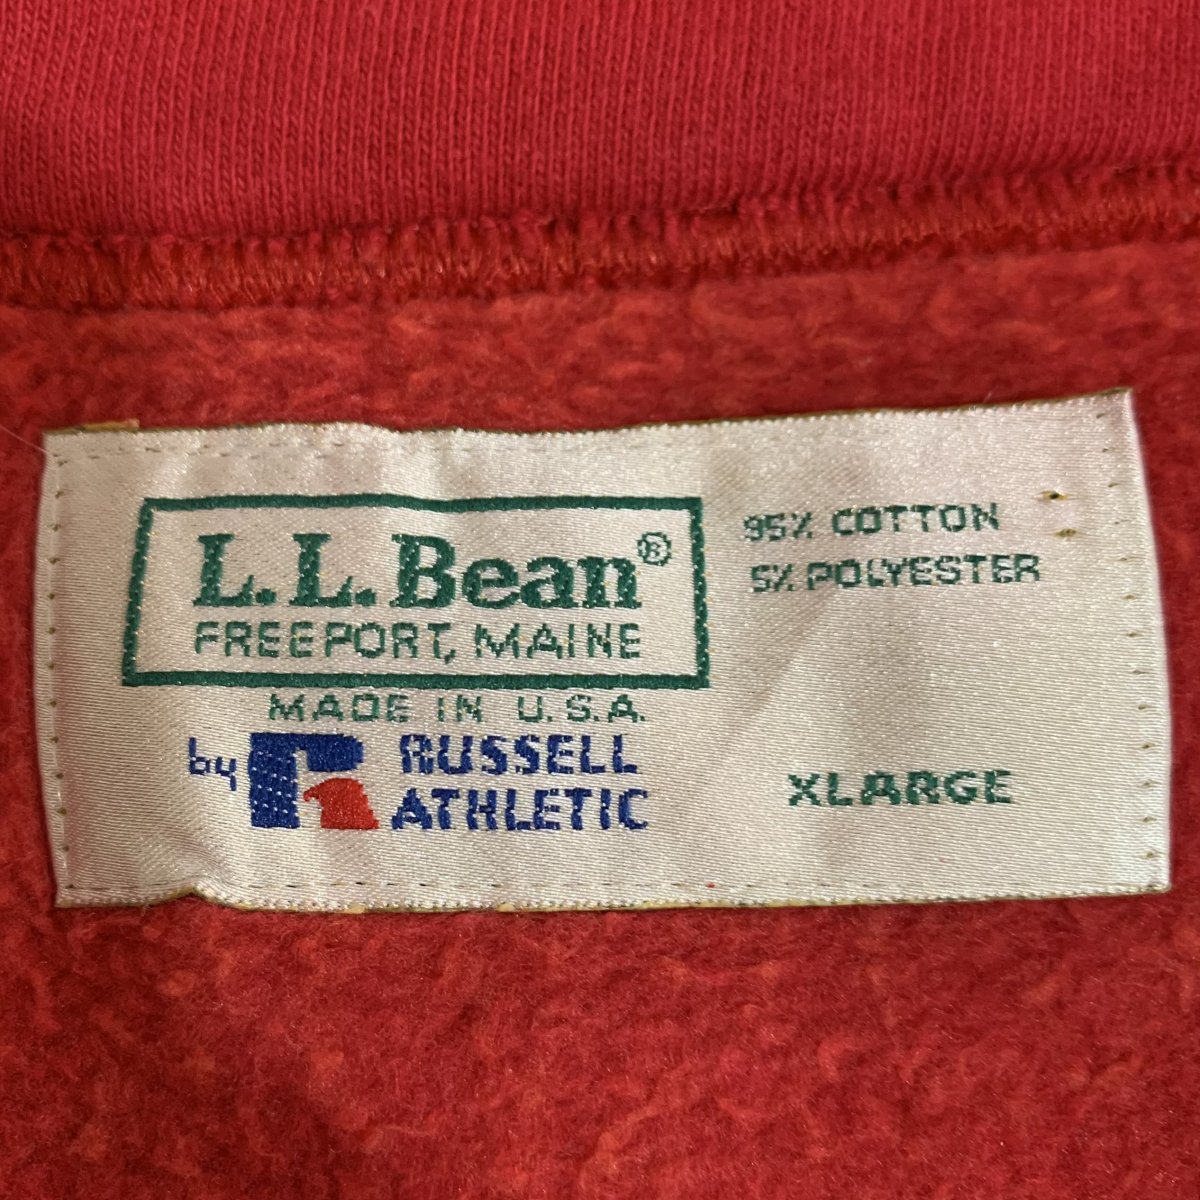 90s RUSSEL ATHLETIC スウェット L.L.Bean USA製